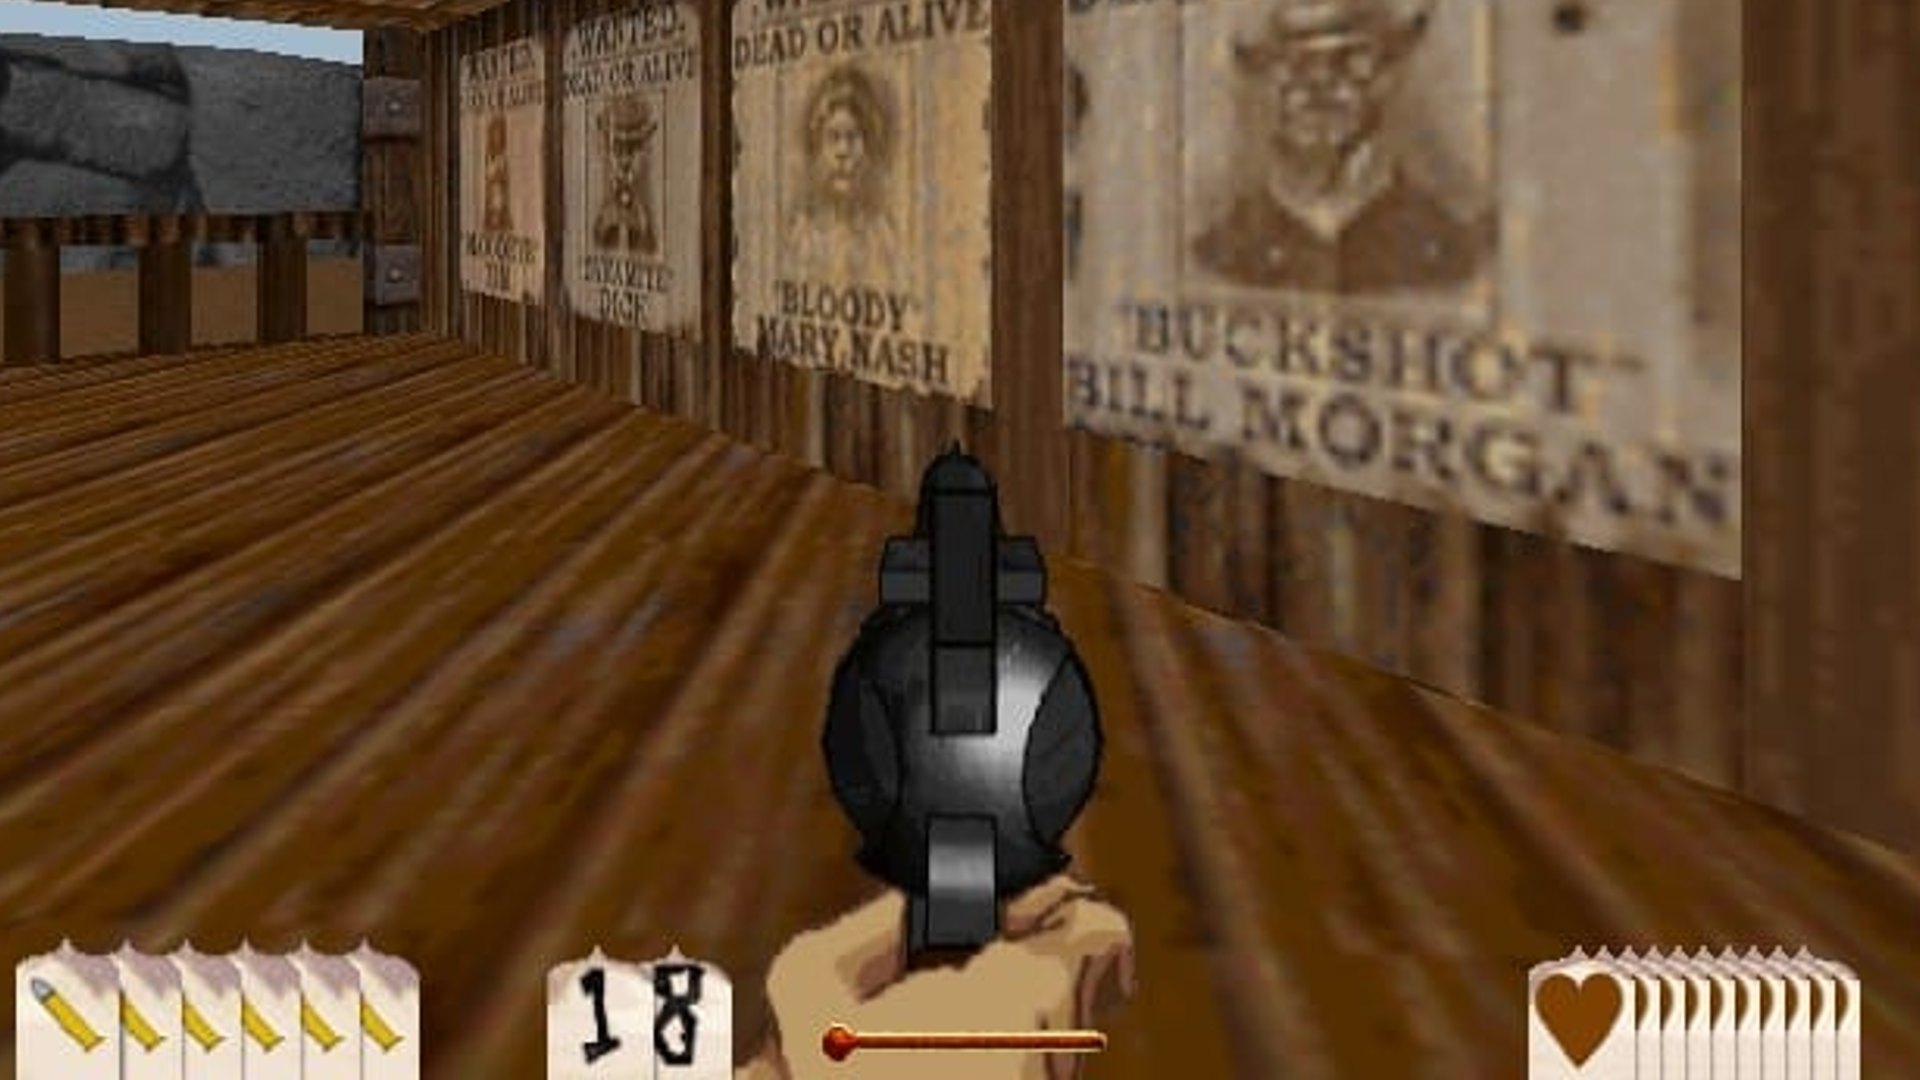 A person can be seen aiming a gun at some wanted posters